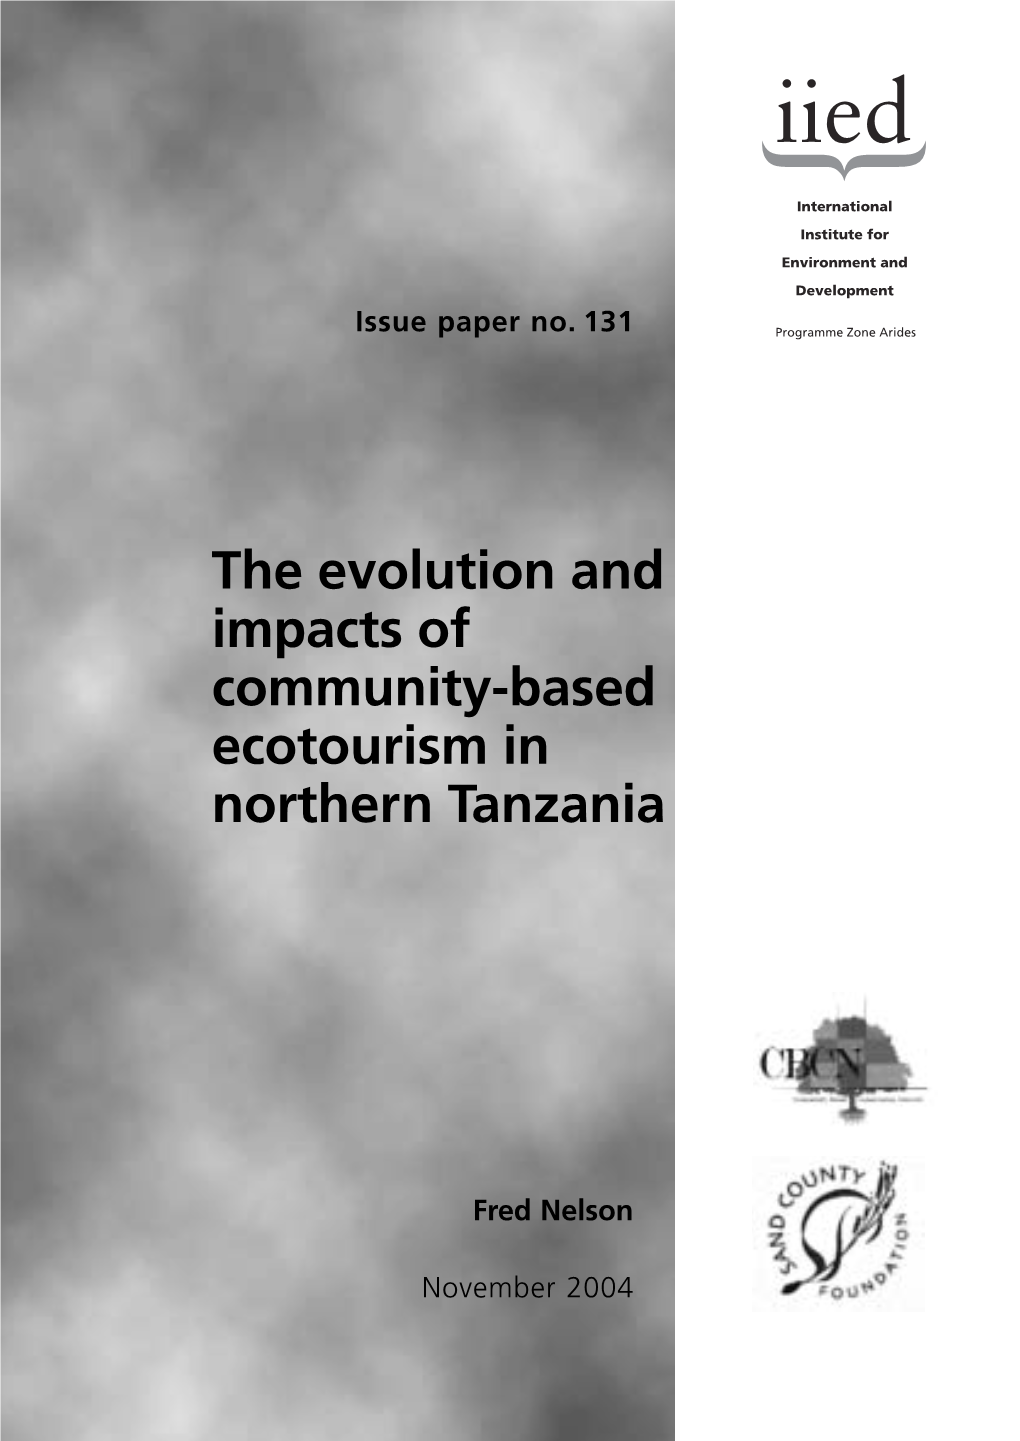 The Evolution and Impacts of Community-Based Ecotourism in Northern Tanzania